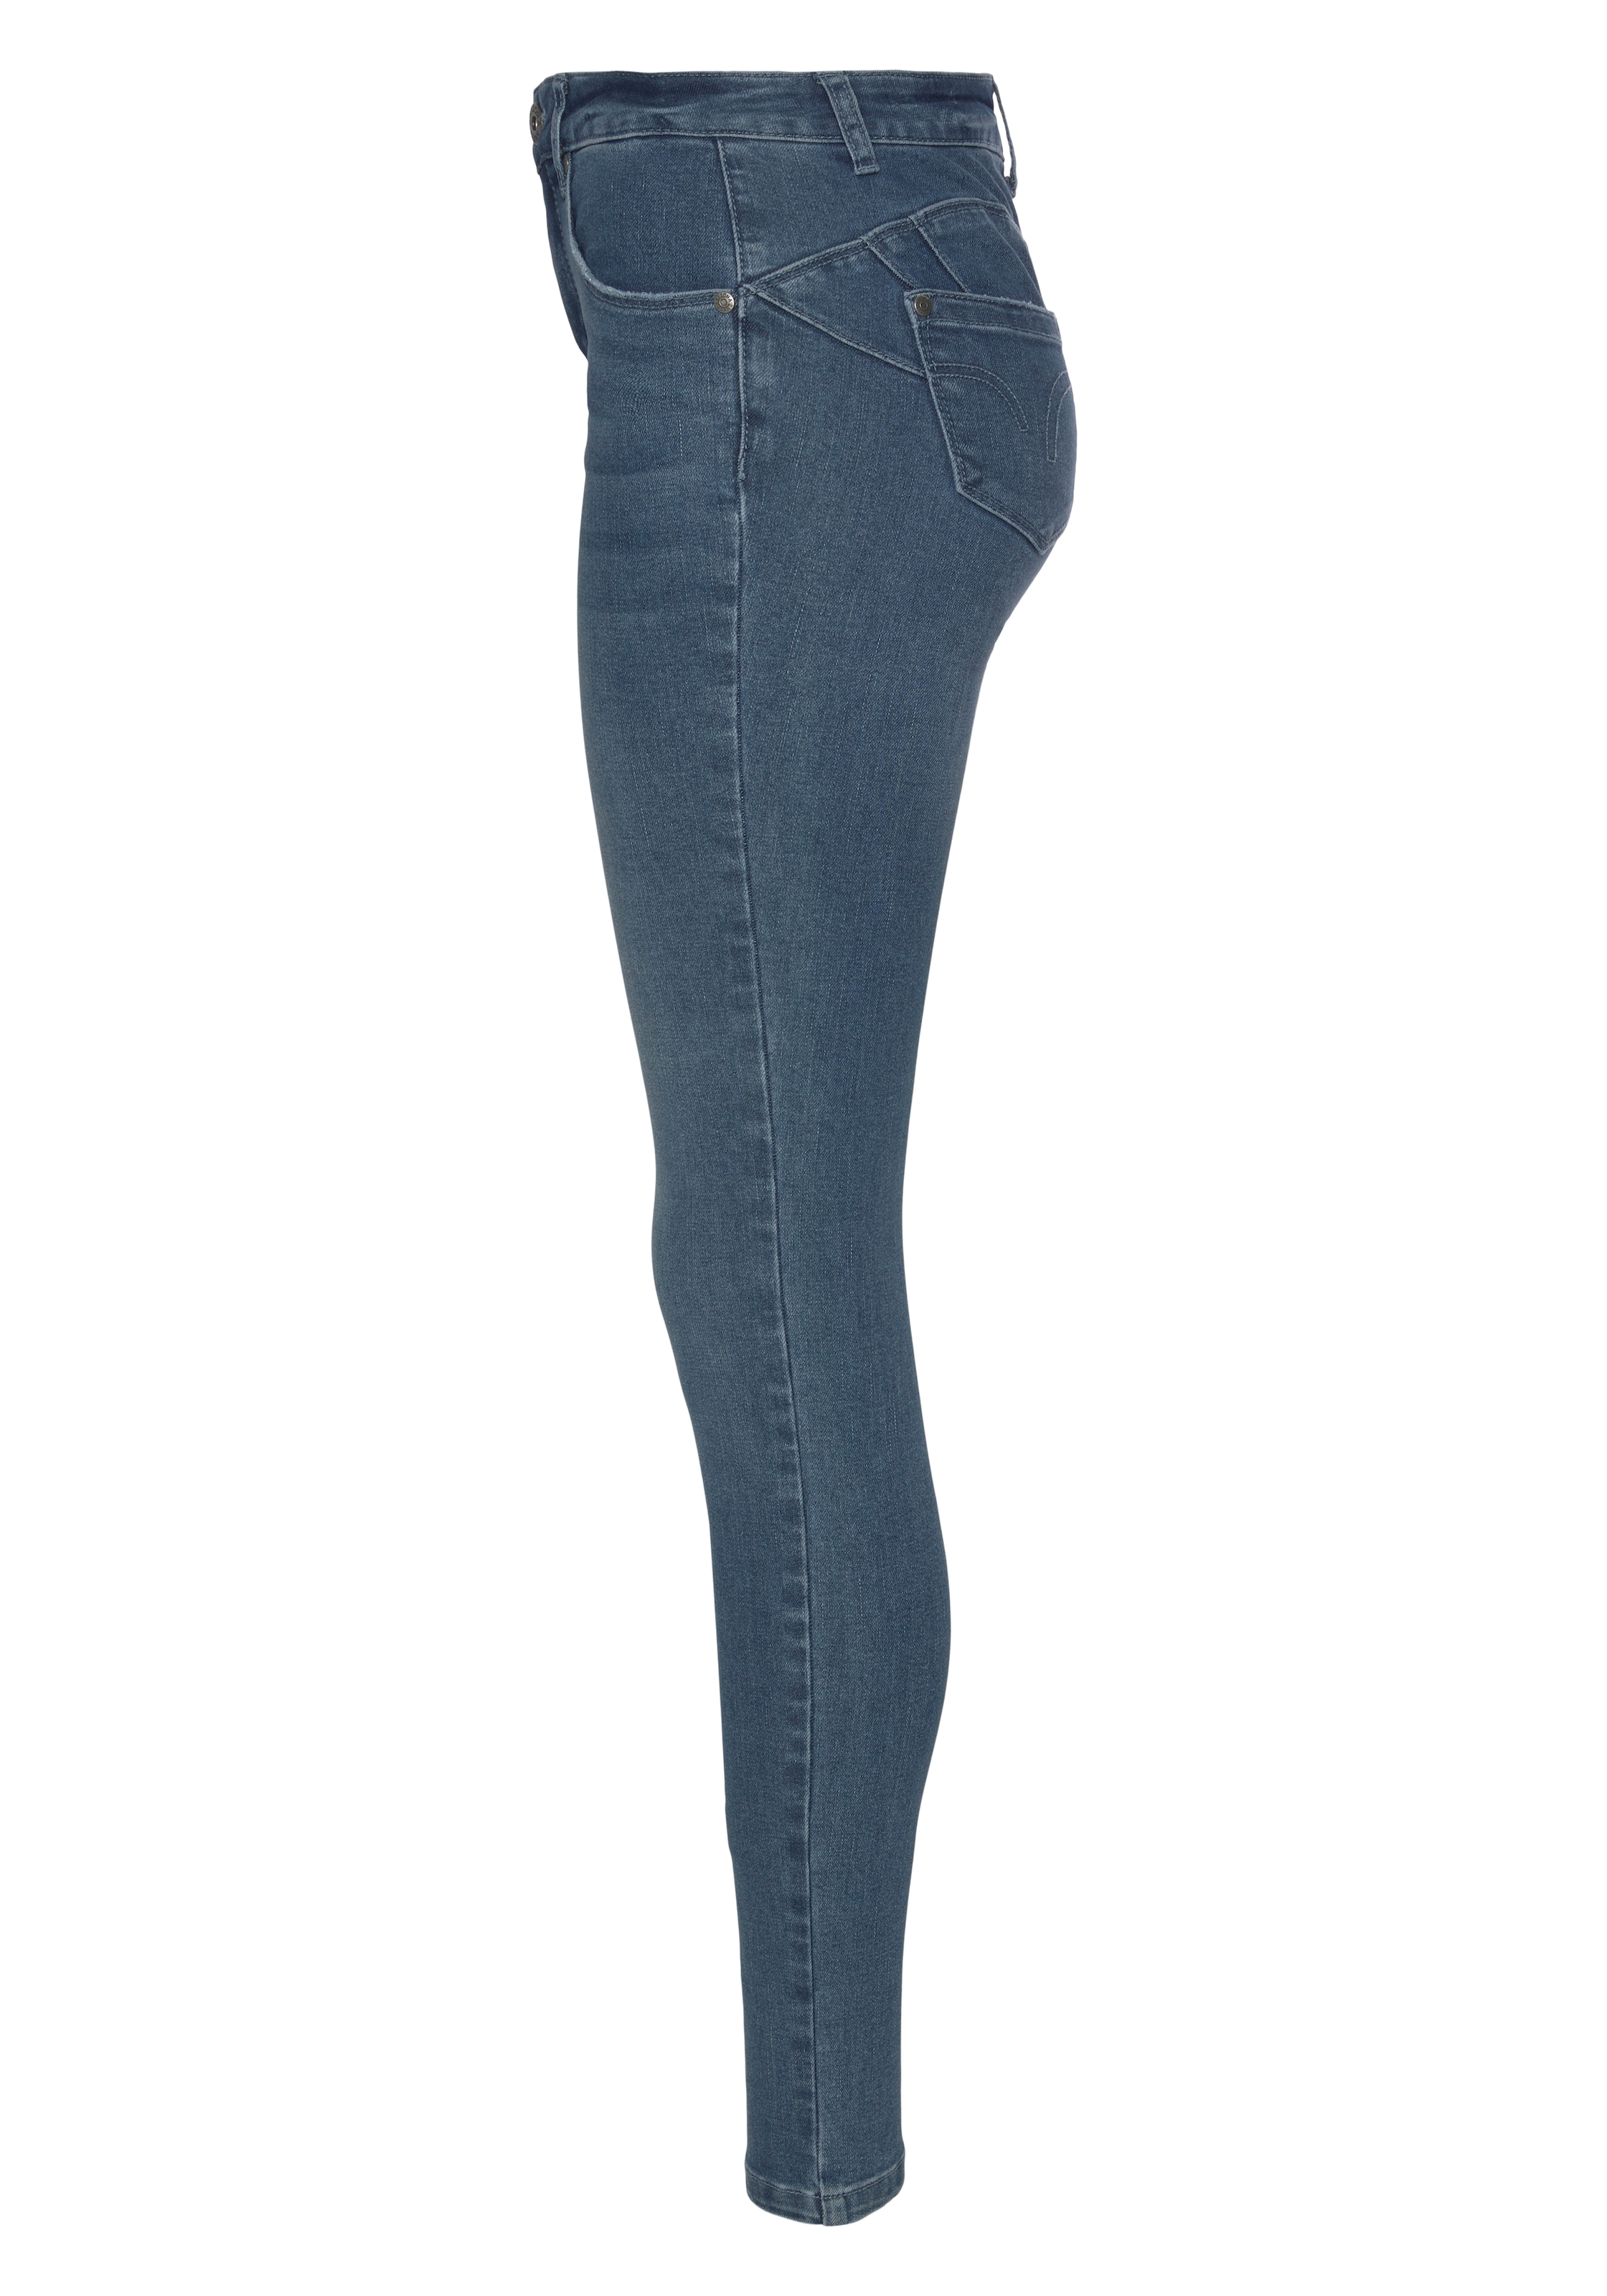 Arizona Skinny-fit-Jeans, Recyceltes Polyester bei ♕ | Stretchjeans